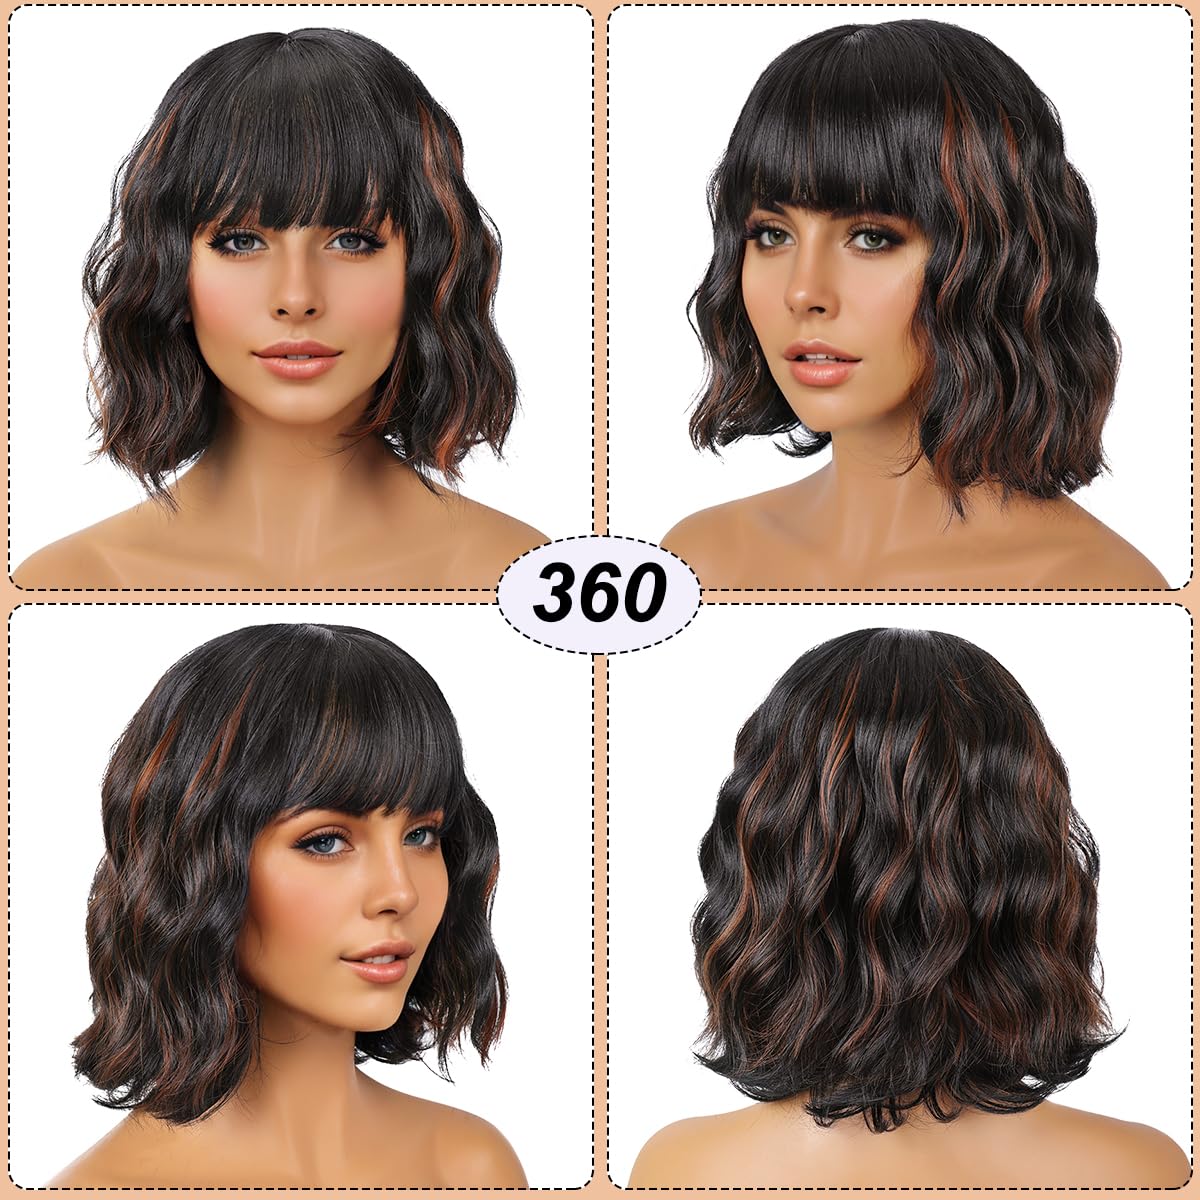 Short Wavy Black Wig with Bangs Bob Short Charming Curly Wavy Wig Women Synthetic Natural Looking Heat Resistant Fiber Hair for Women (14inch)